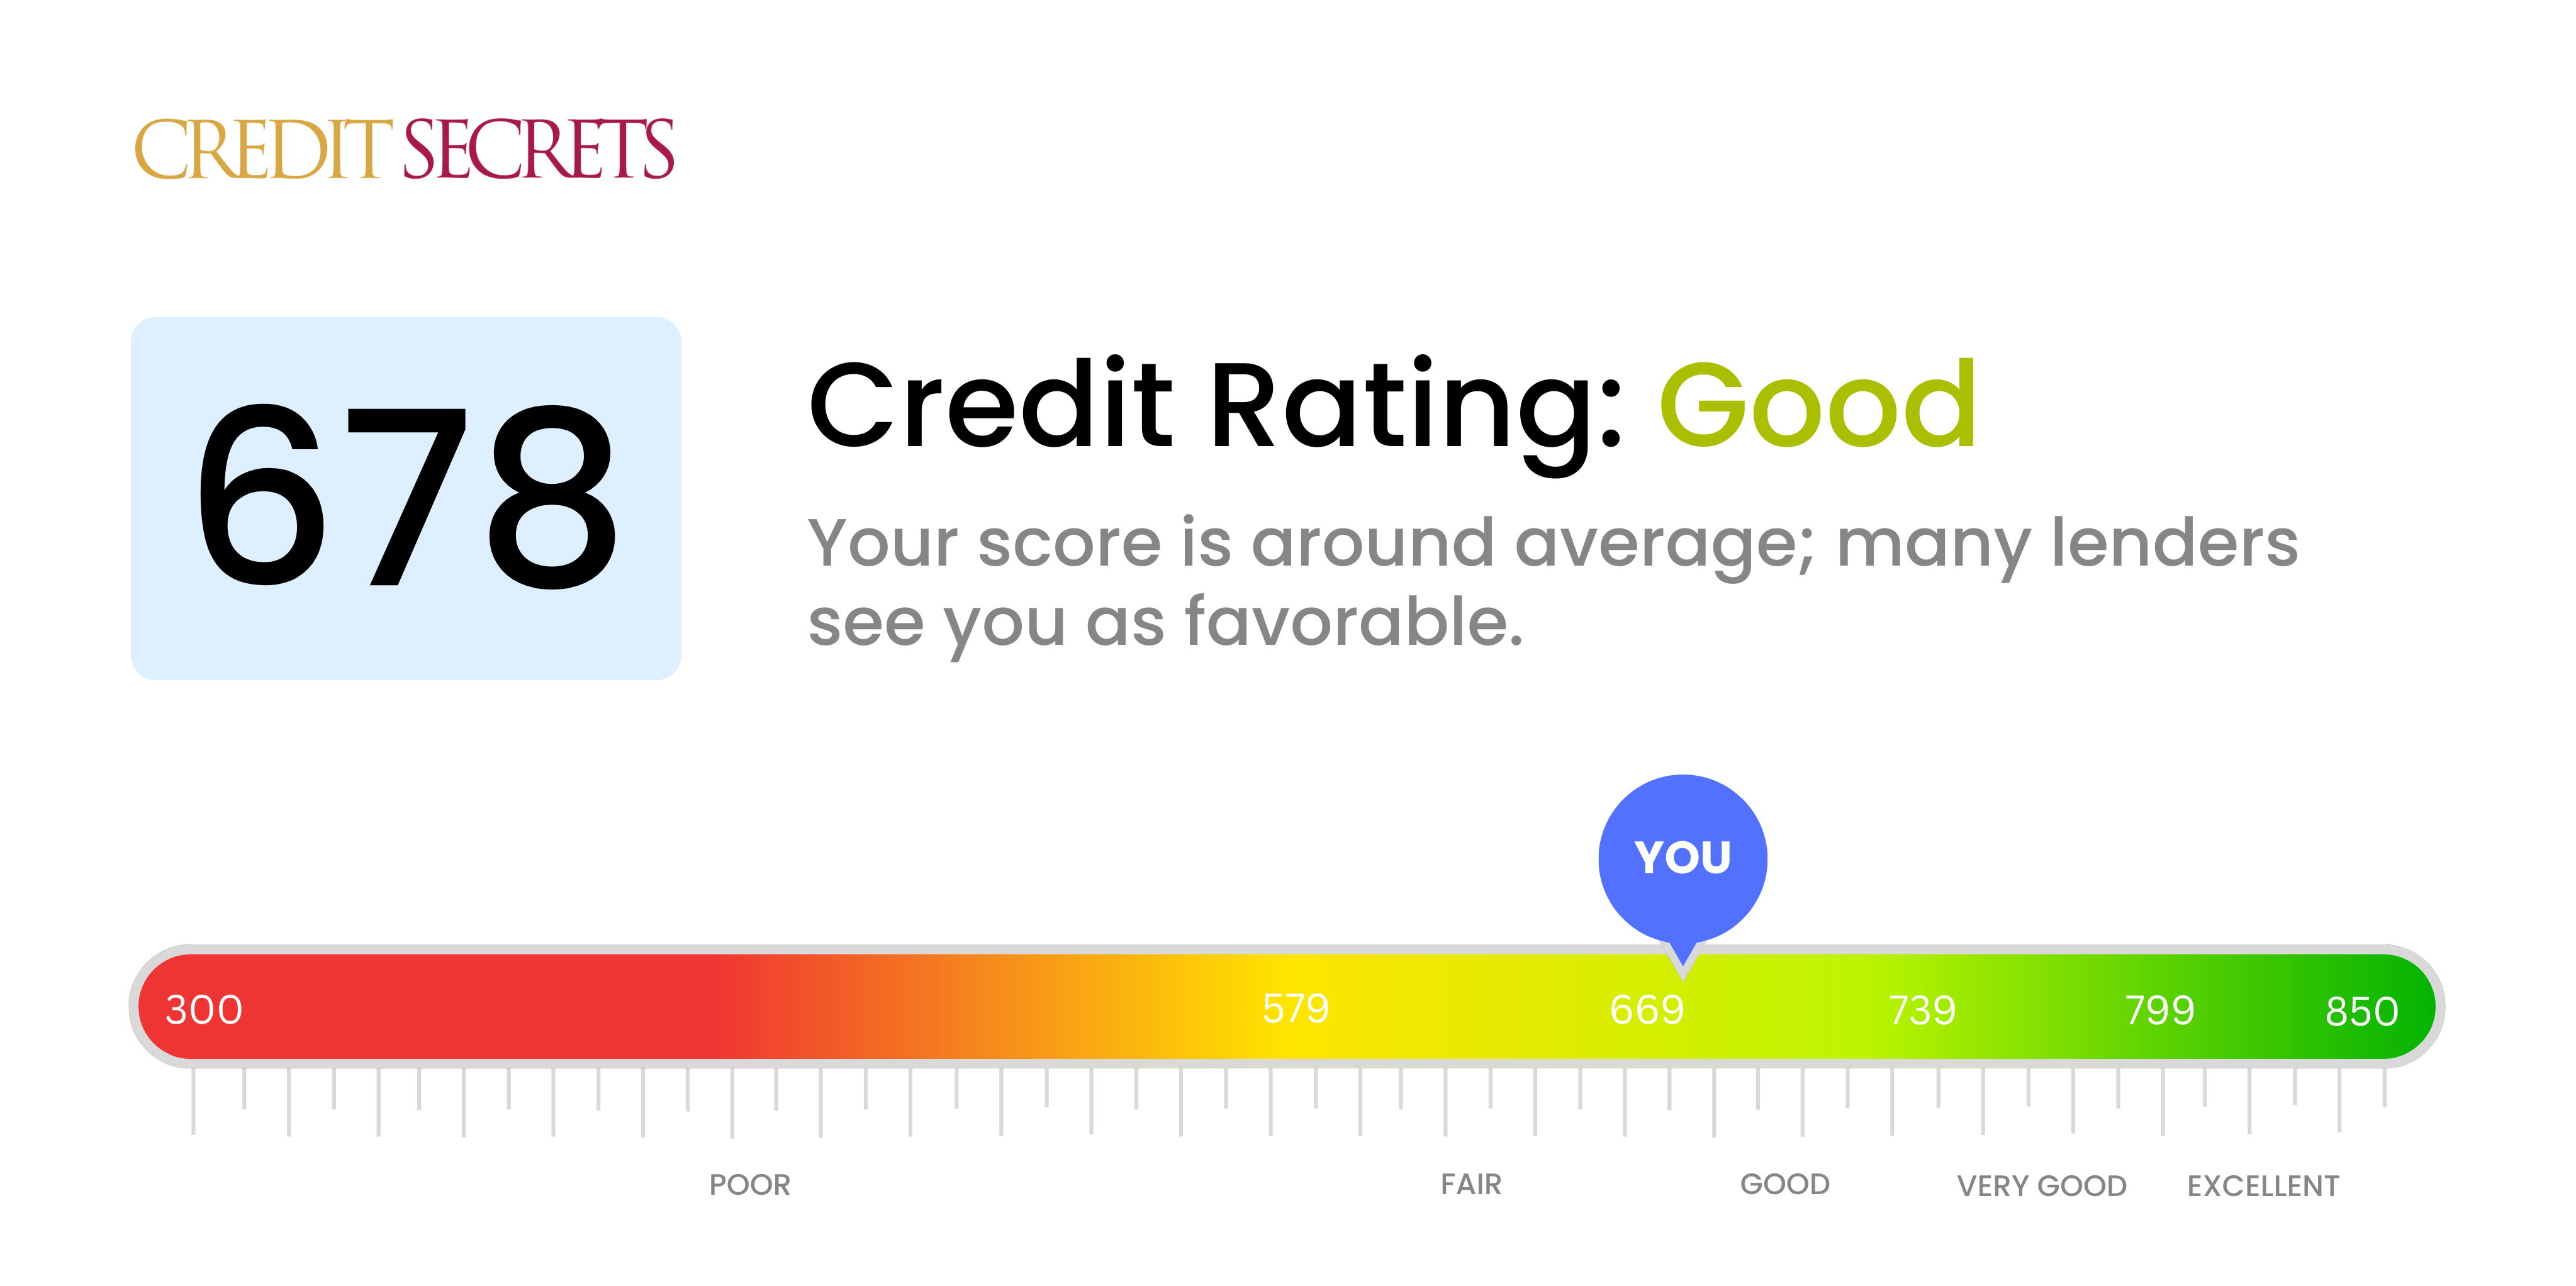 Is 678 a good credit score?